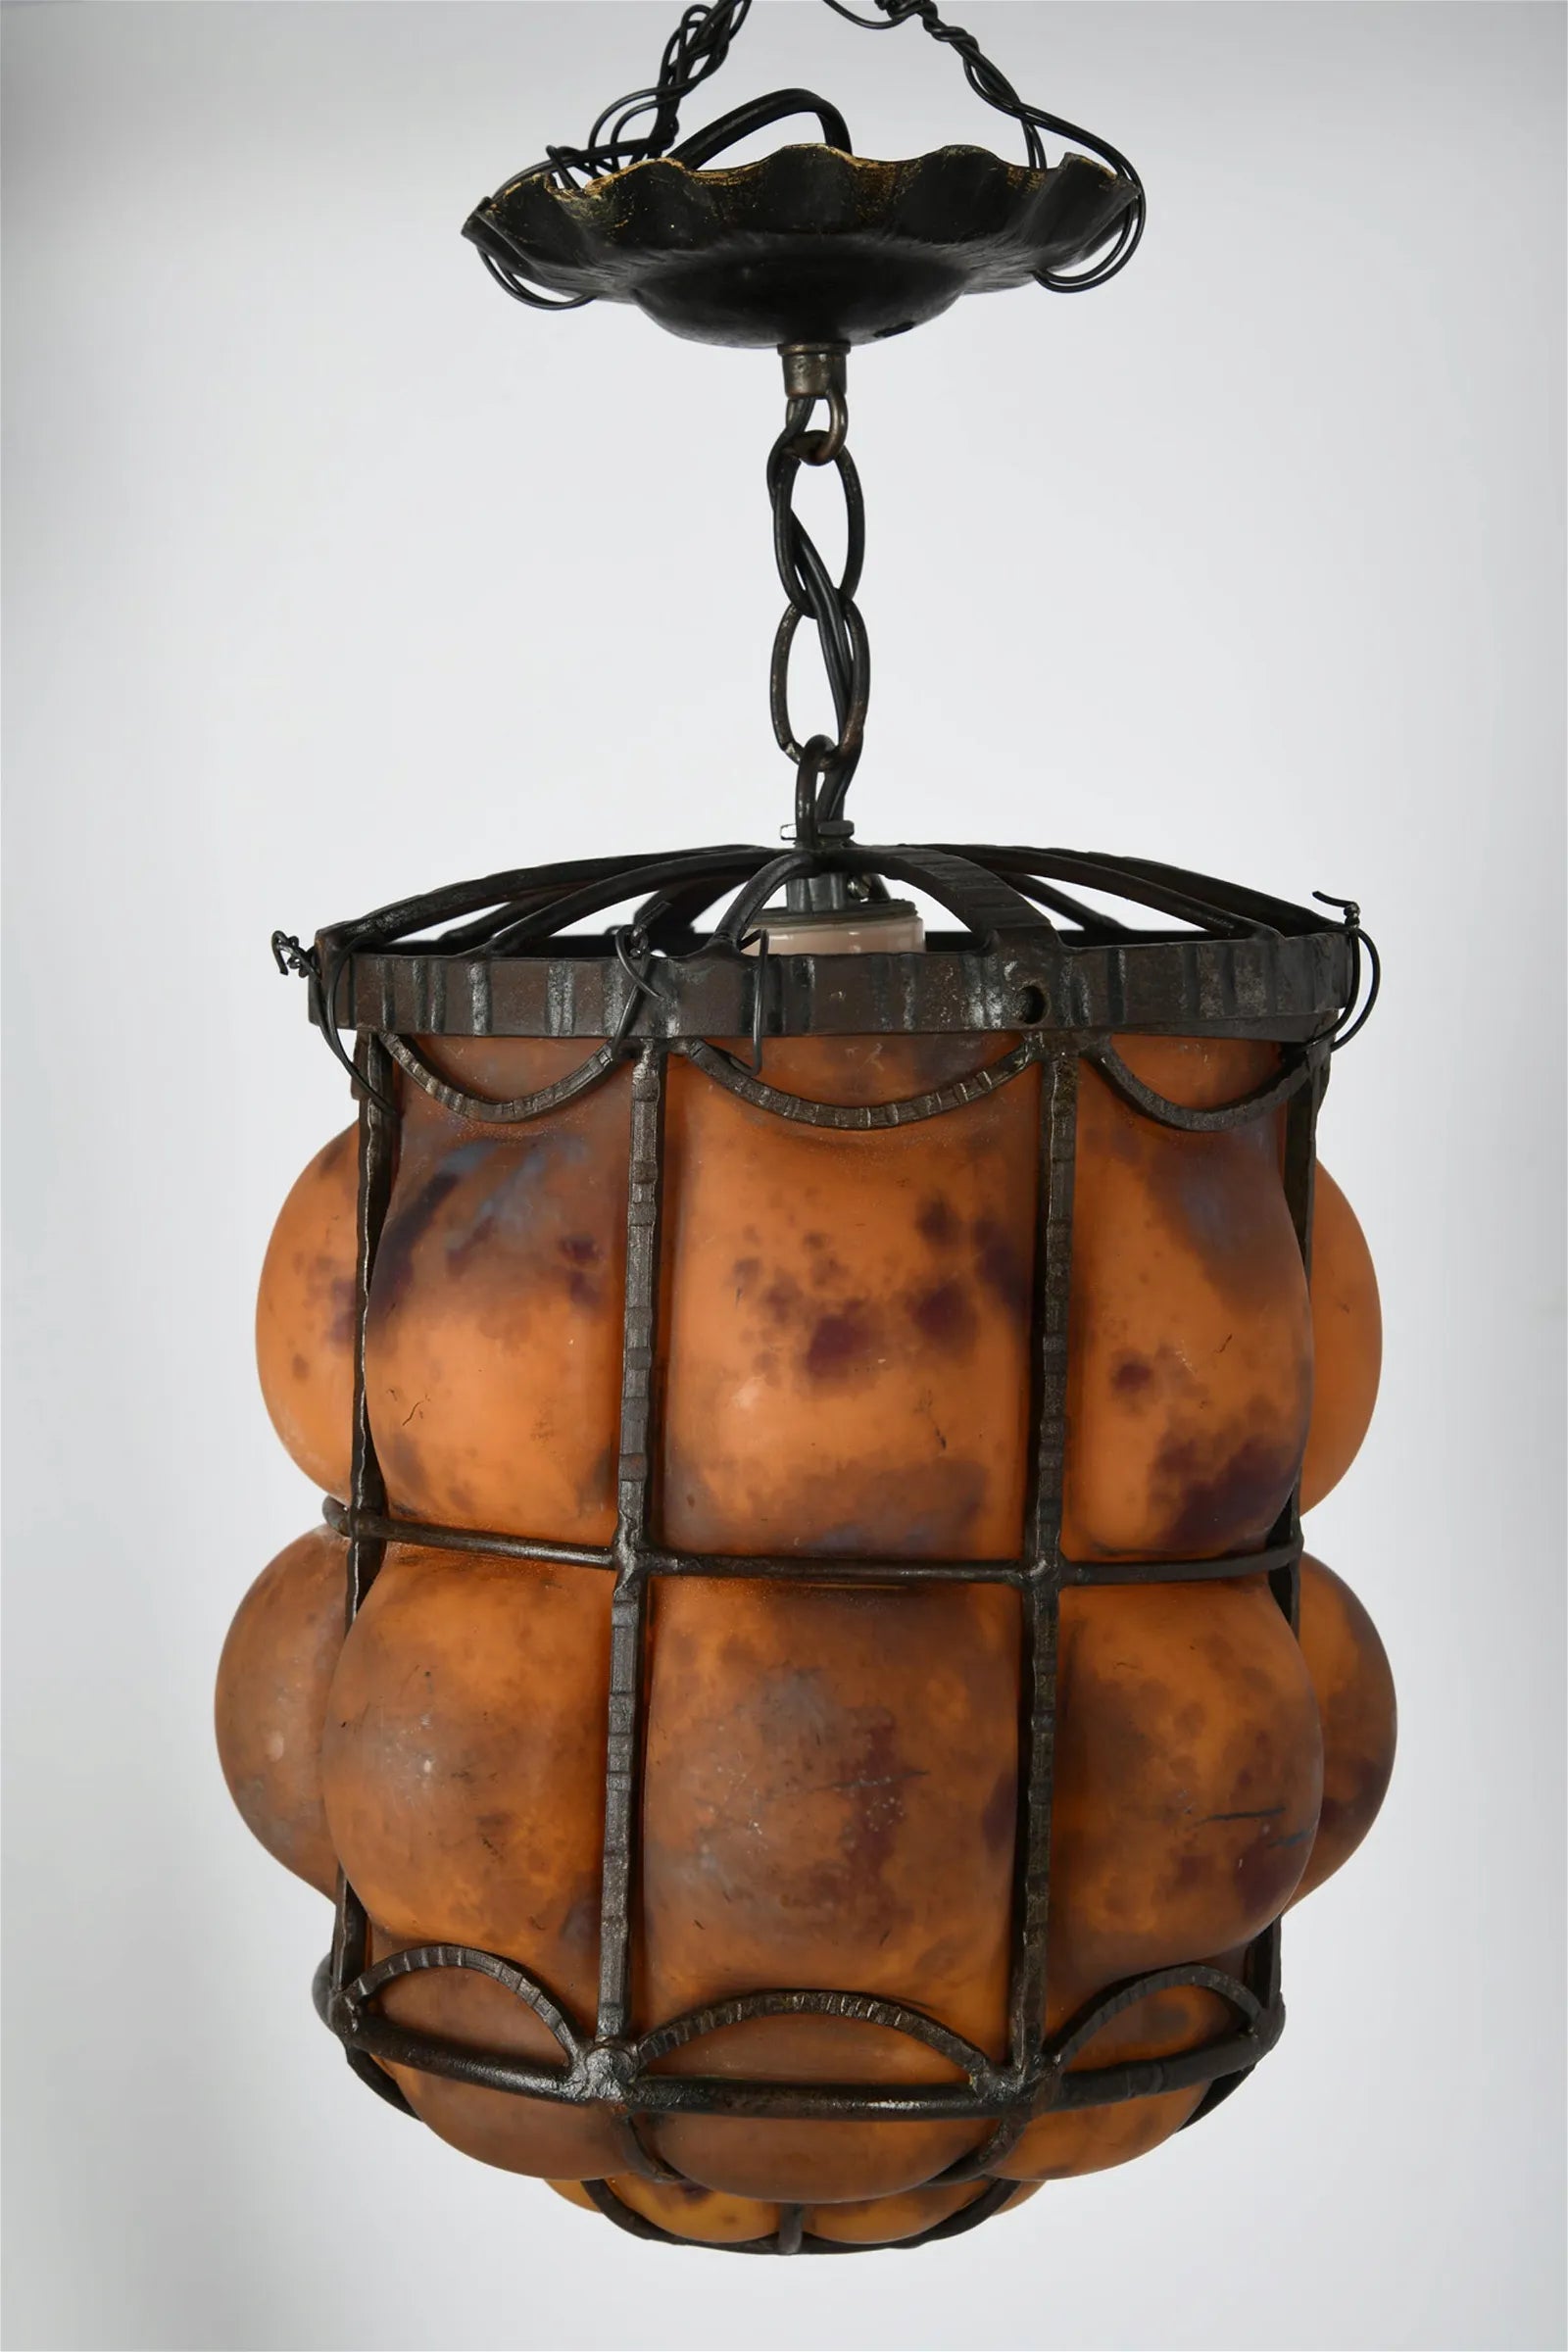 AL1-031: Daum Nancy & Louis Majorelle - Early 20th Century Hand Forged Iron Chandelier with Blown Mottled Glass